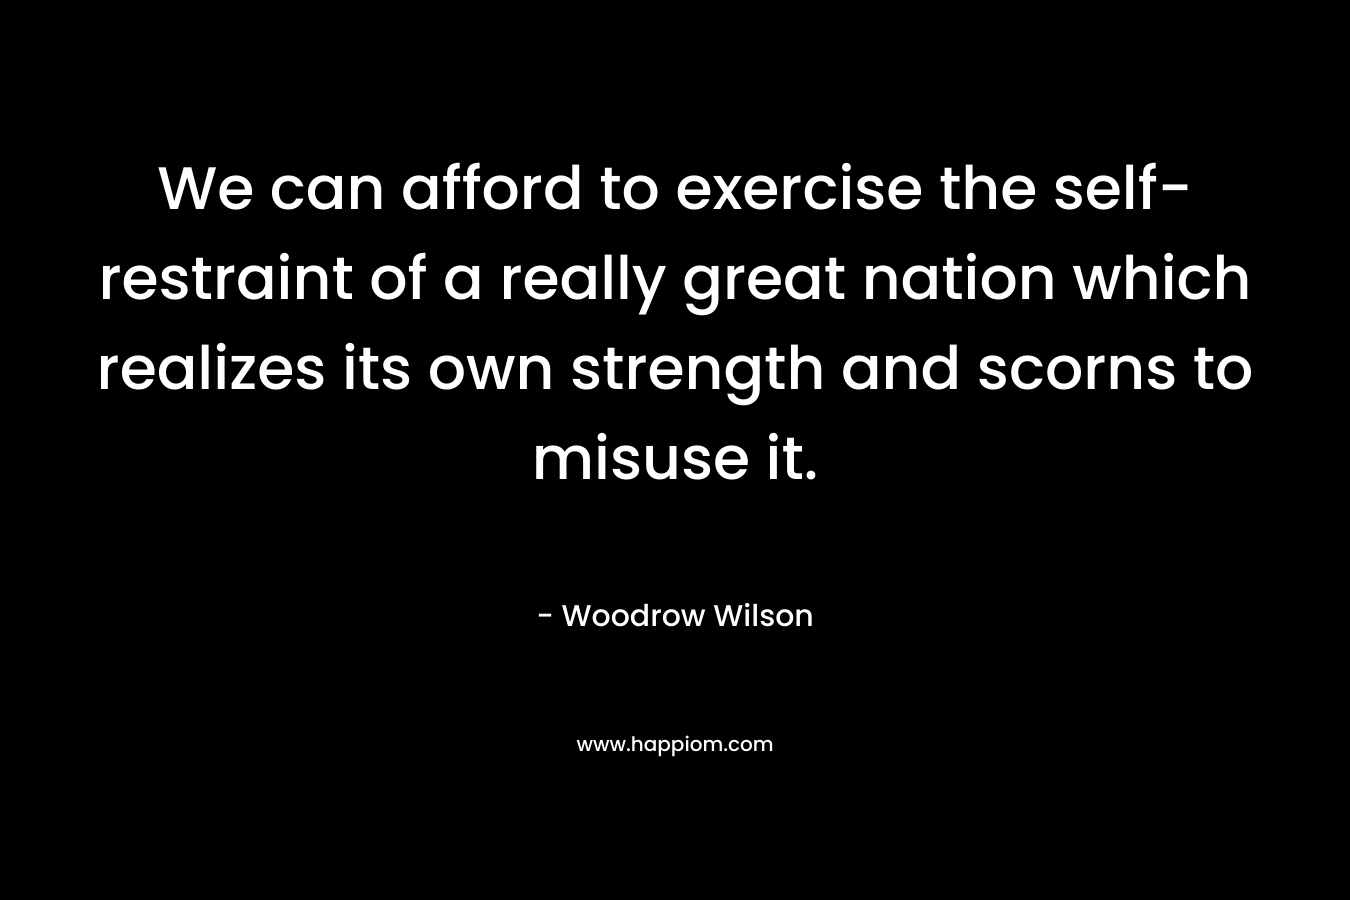 We can afford to exercise the self-restraint of a really great nation which realizes its own strength and scorns to misuse it. – Woodrow Wilson